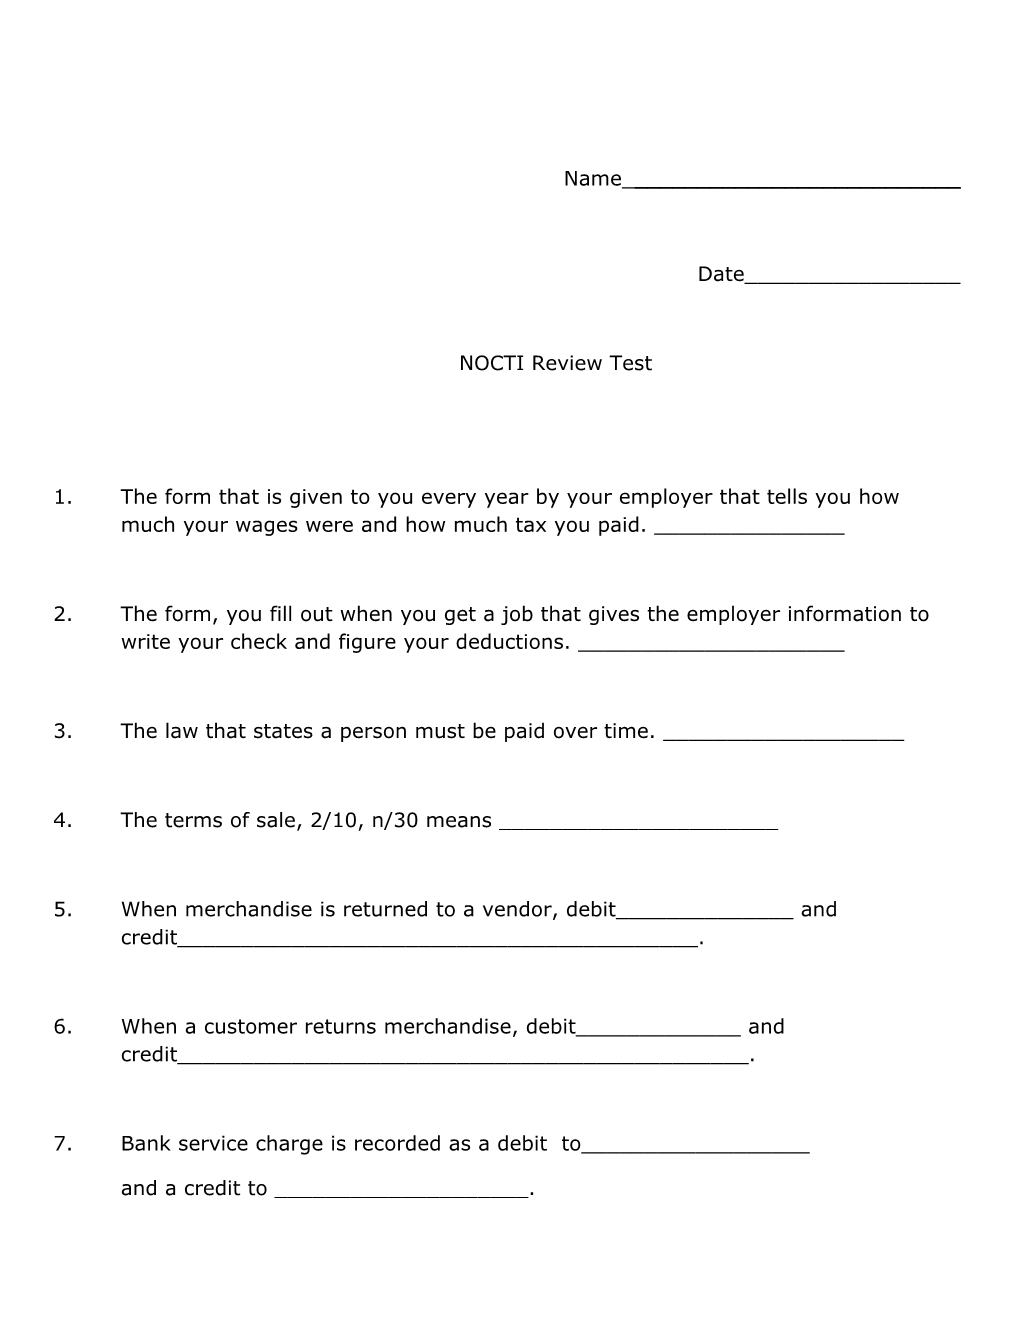 NOCTI Review Test